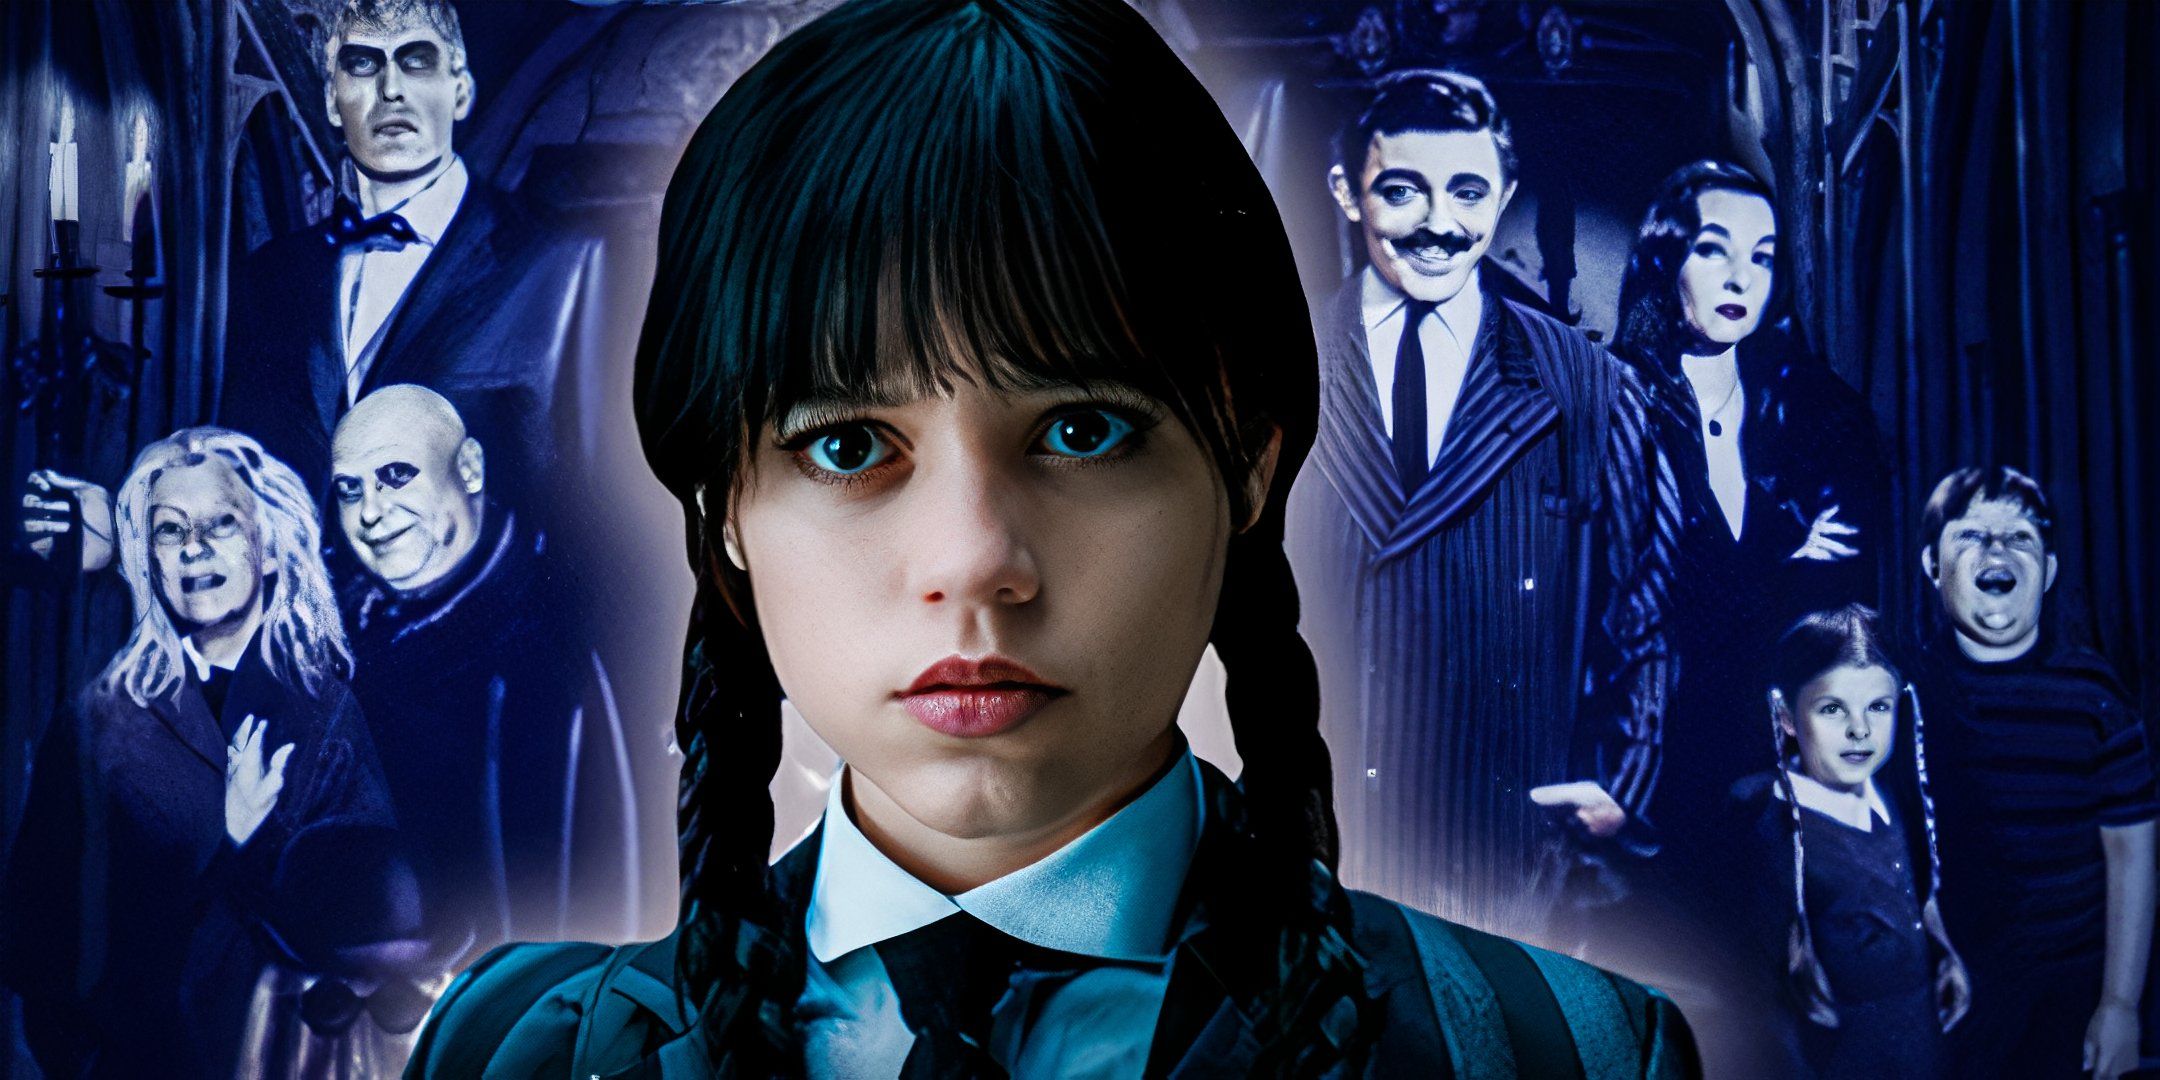 Wednesday Season 2 Has A Huge Choice To Make With Its New Addams Family Member After 60 Years Of Confusion